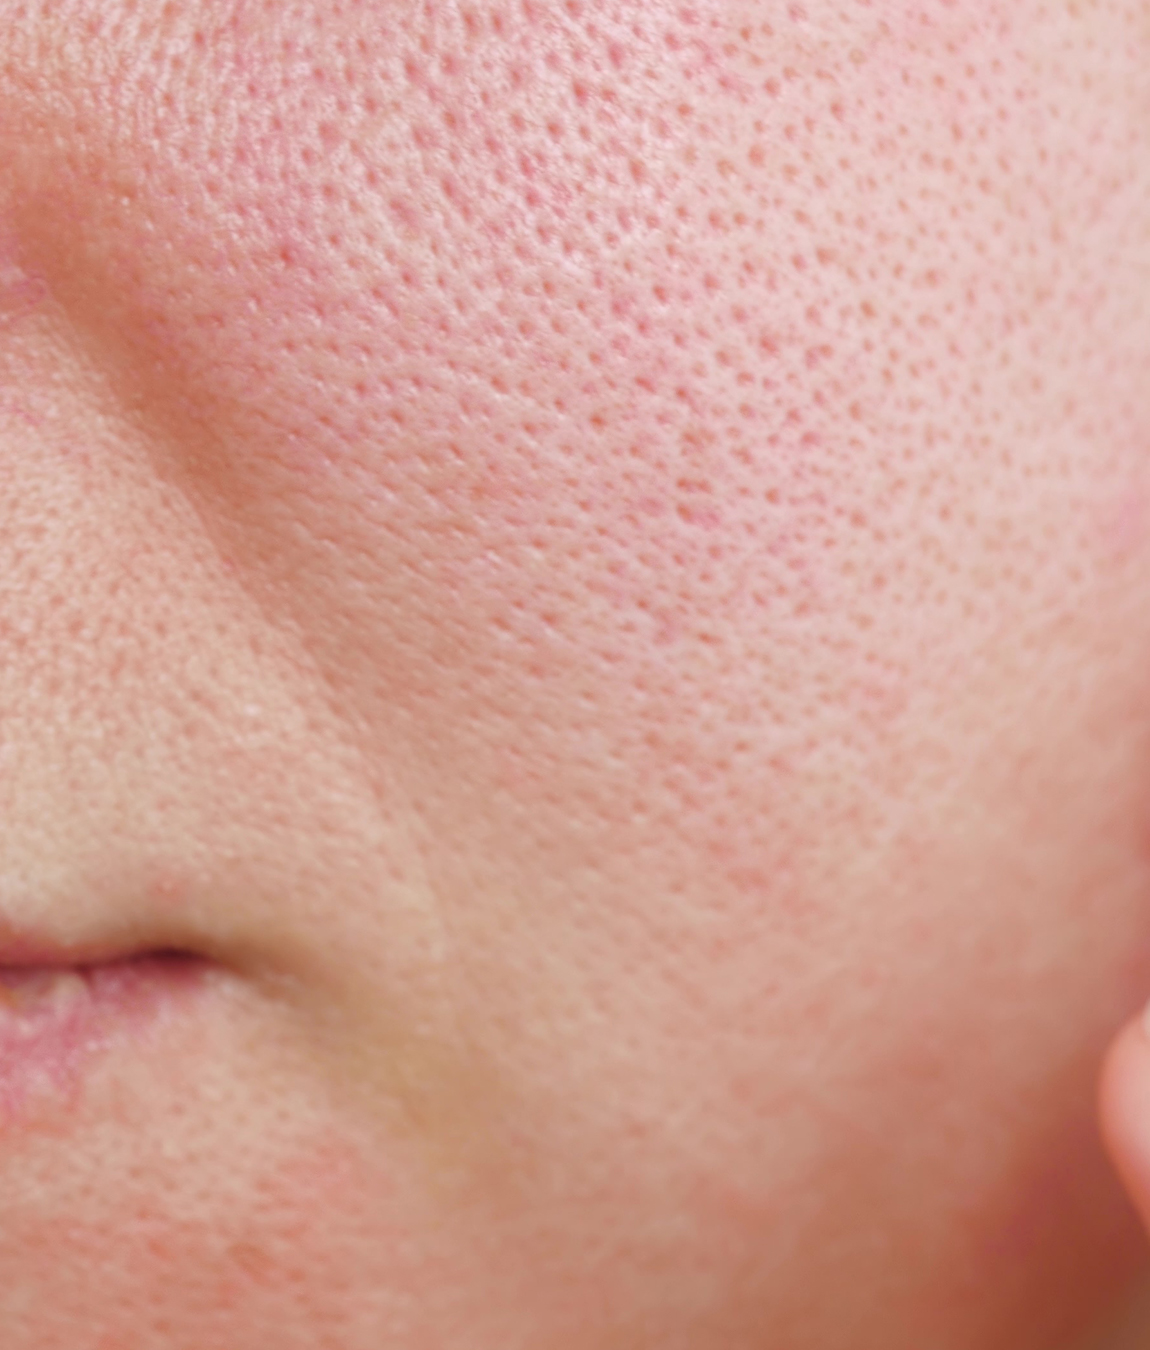 Close-up on enlarged pores